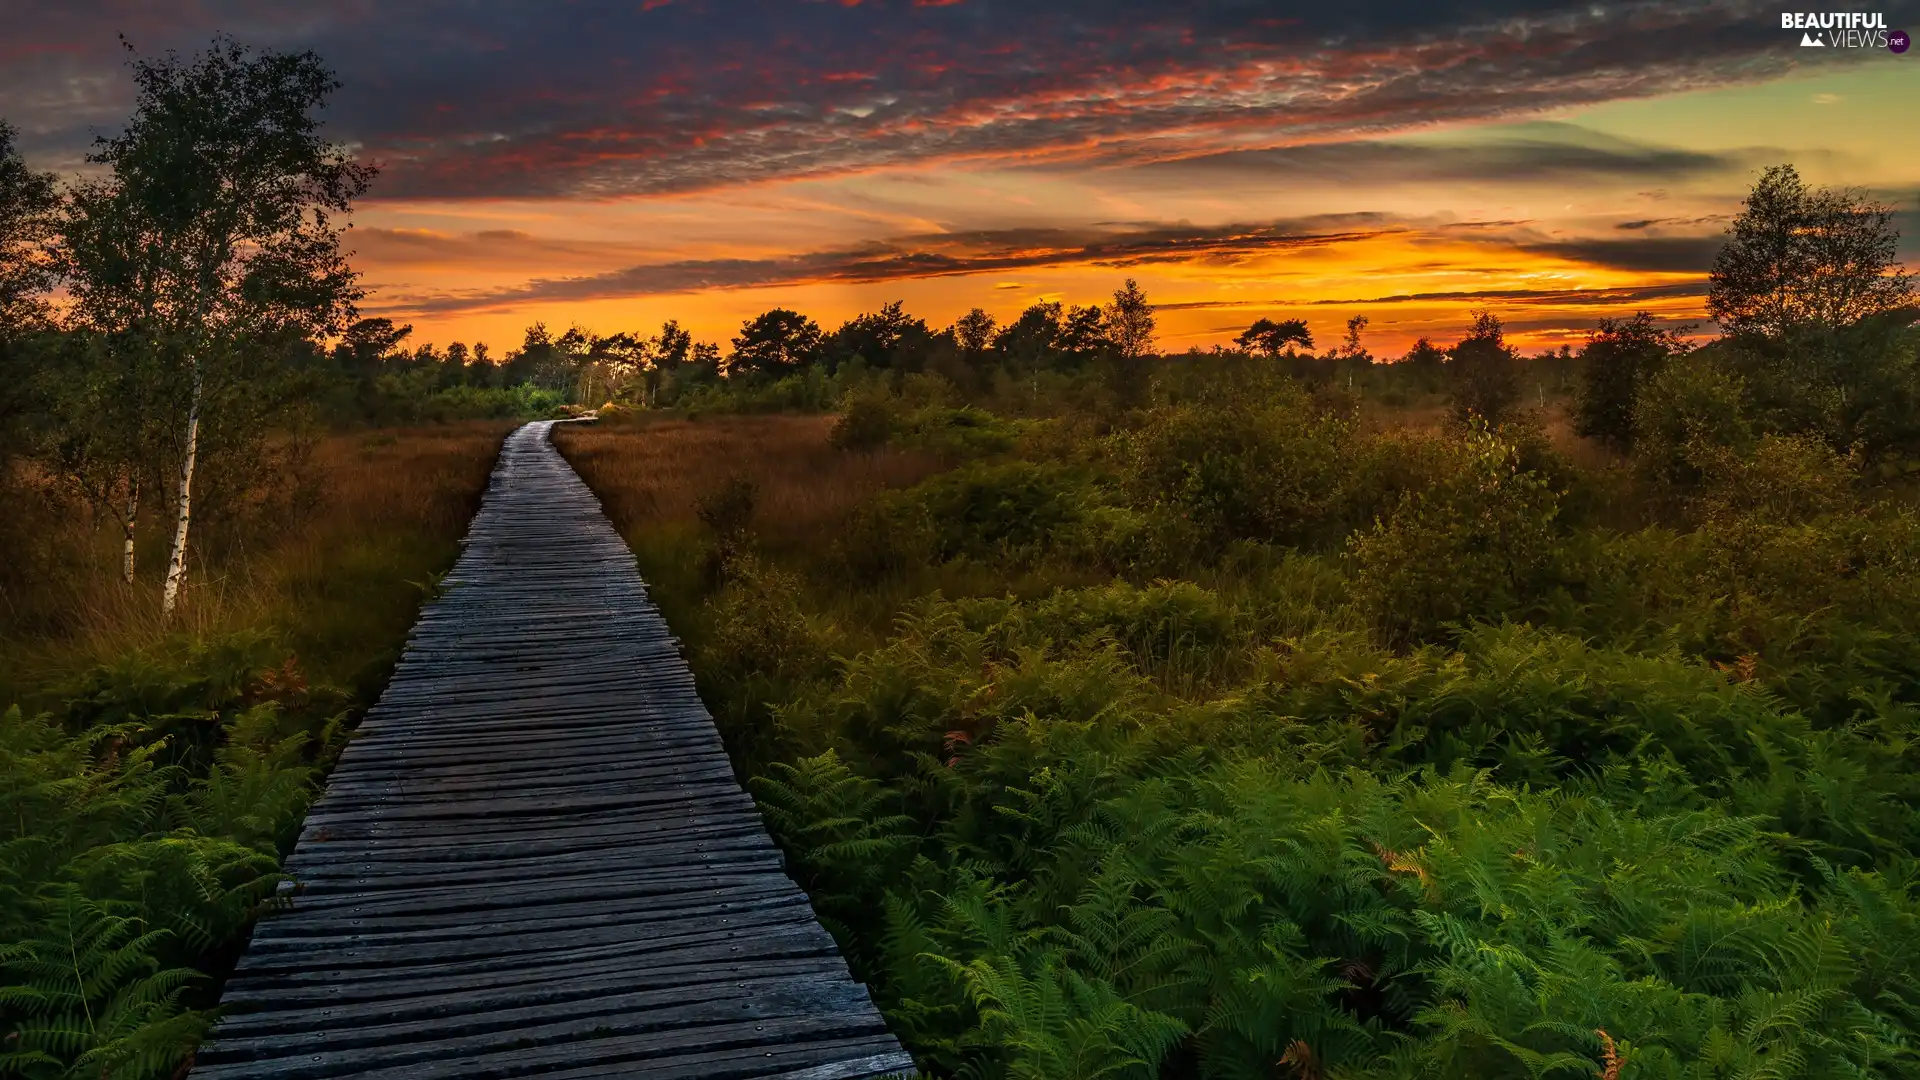 viewes, Platform, fern, trees, Meadow, Bush, Great Sunsets